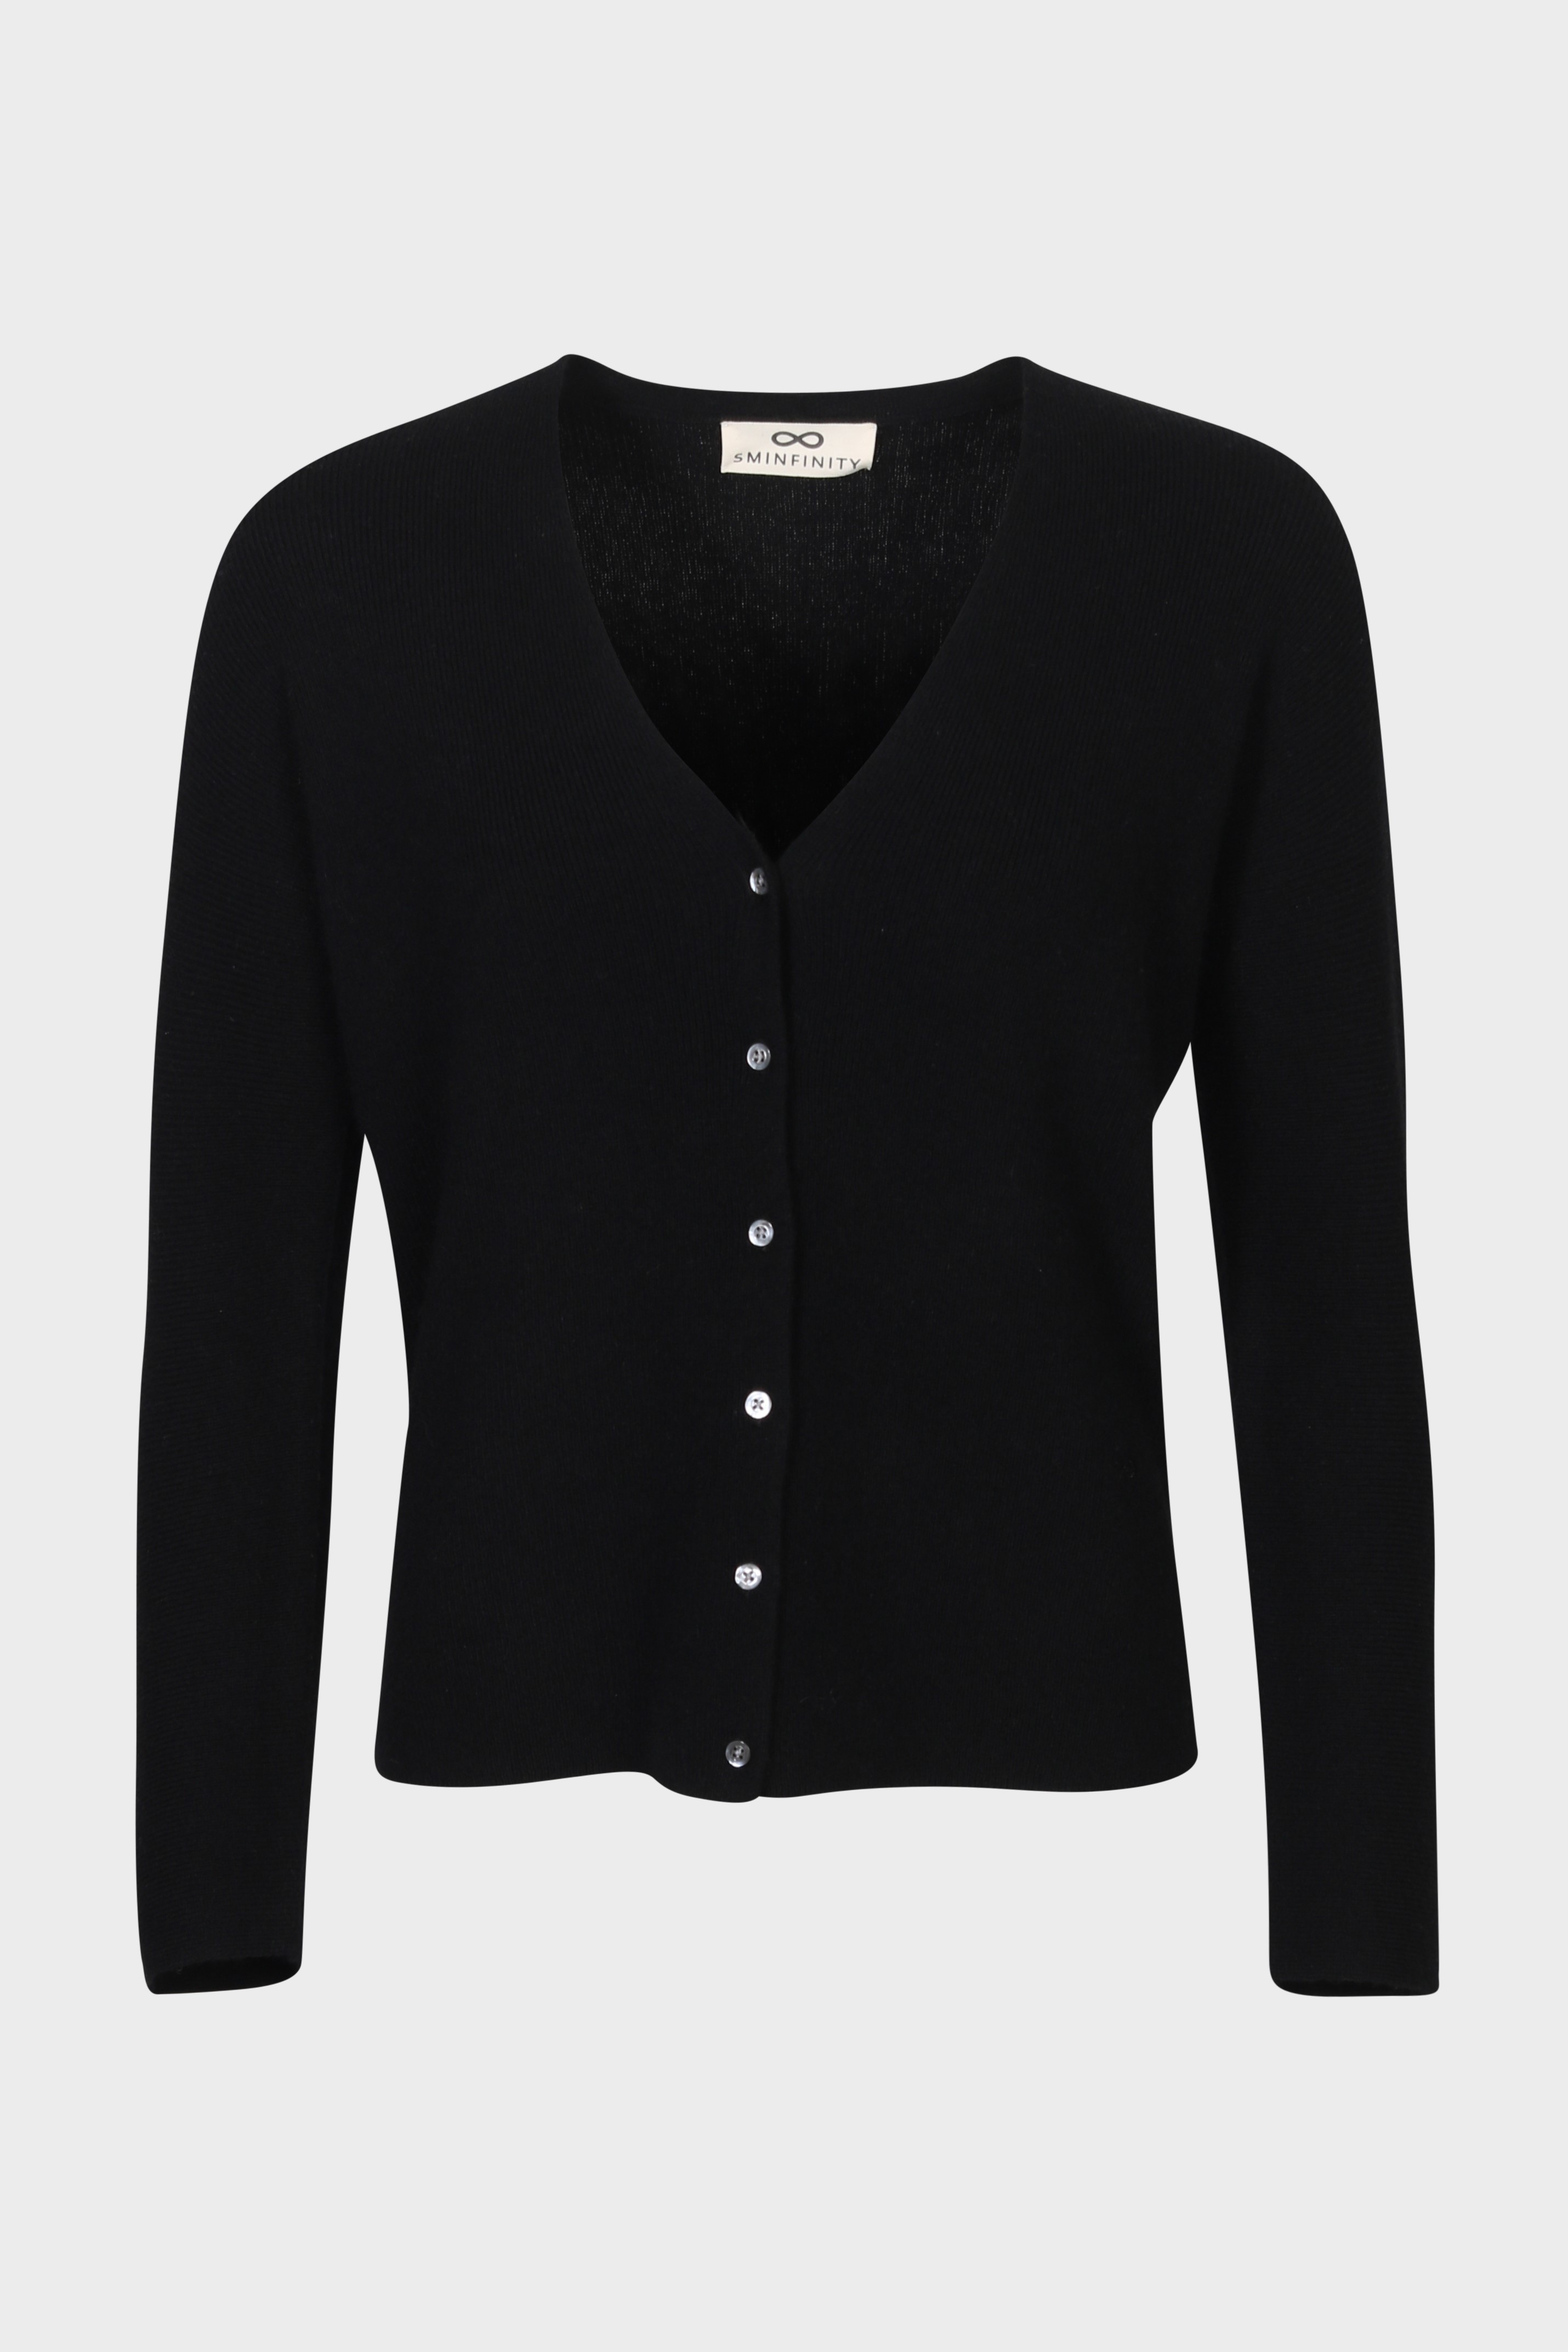 SMINFINITY Chilly Fitted Knit Cardigan in Black S